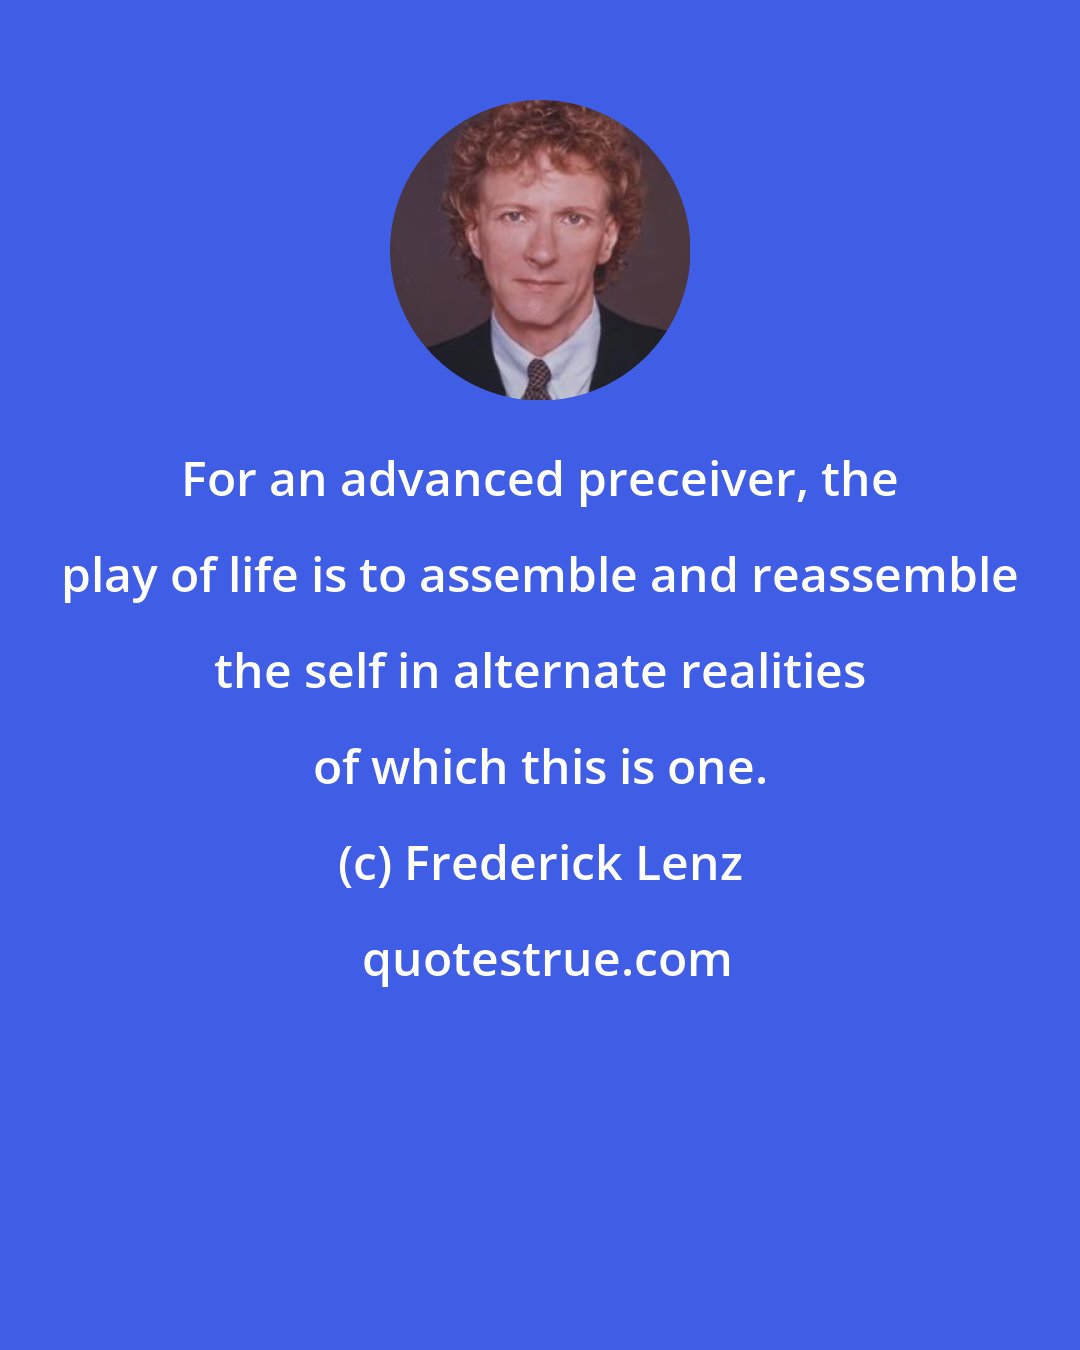 Frederick Lenz: For an advanced preceiver, the play of life is to assemble and reassemble the self in alternate realities of which this is one.